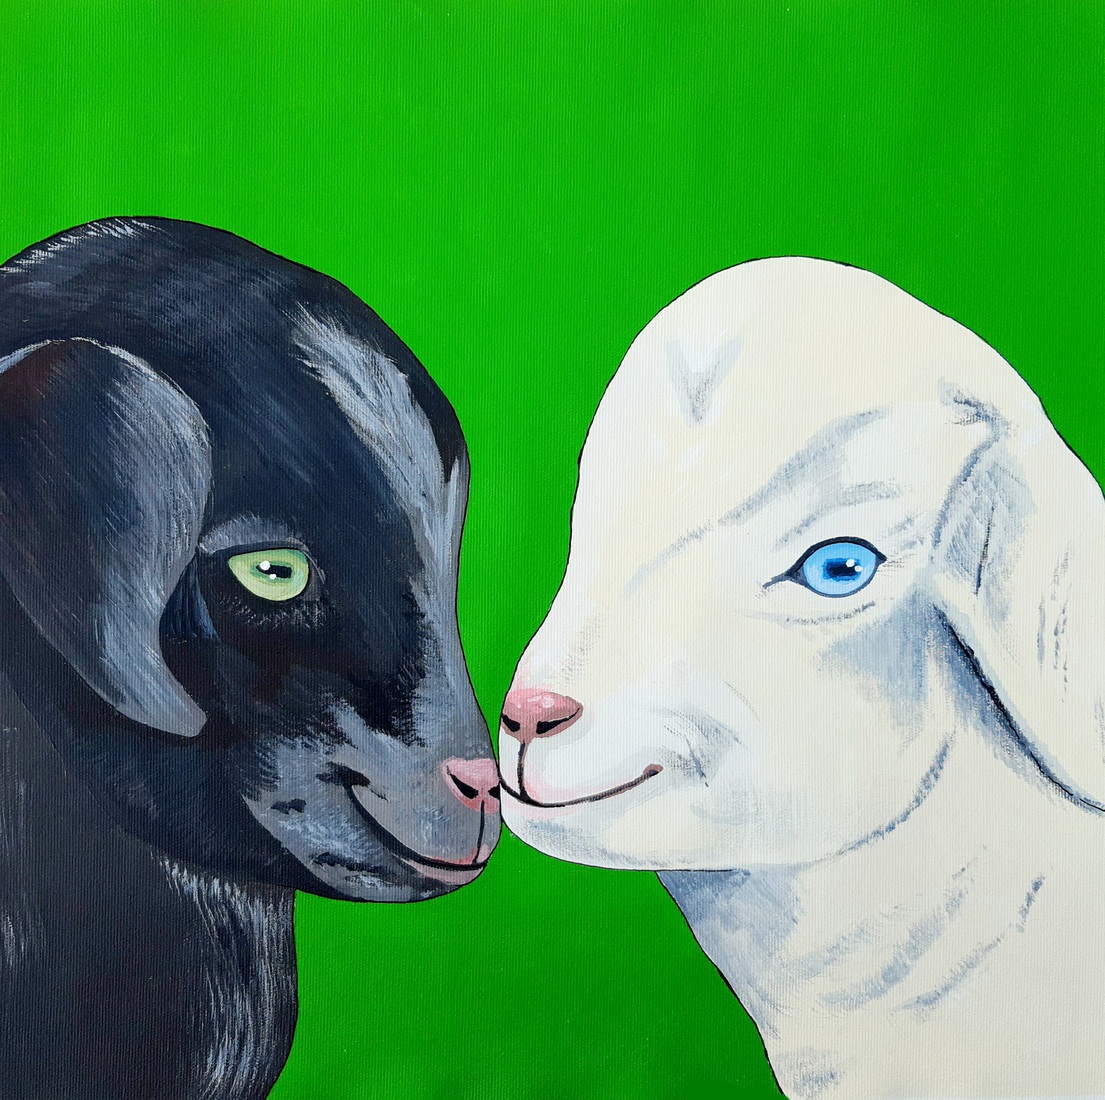 Back and white baby goats, zwart wit baby geitjes